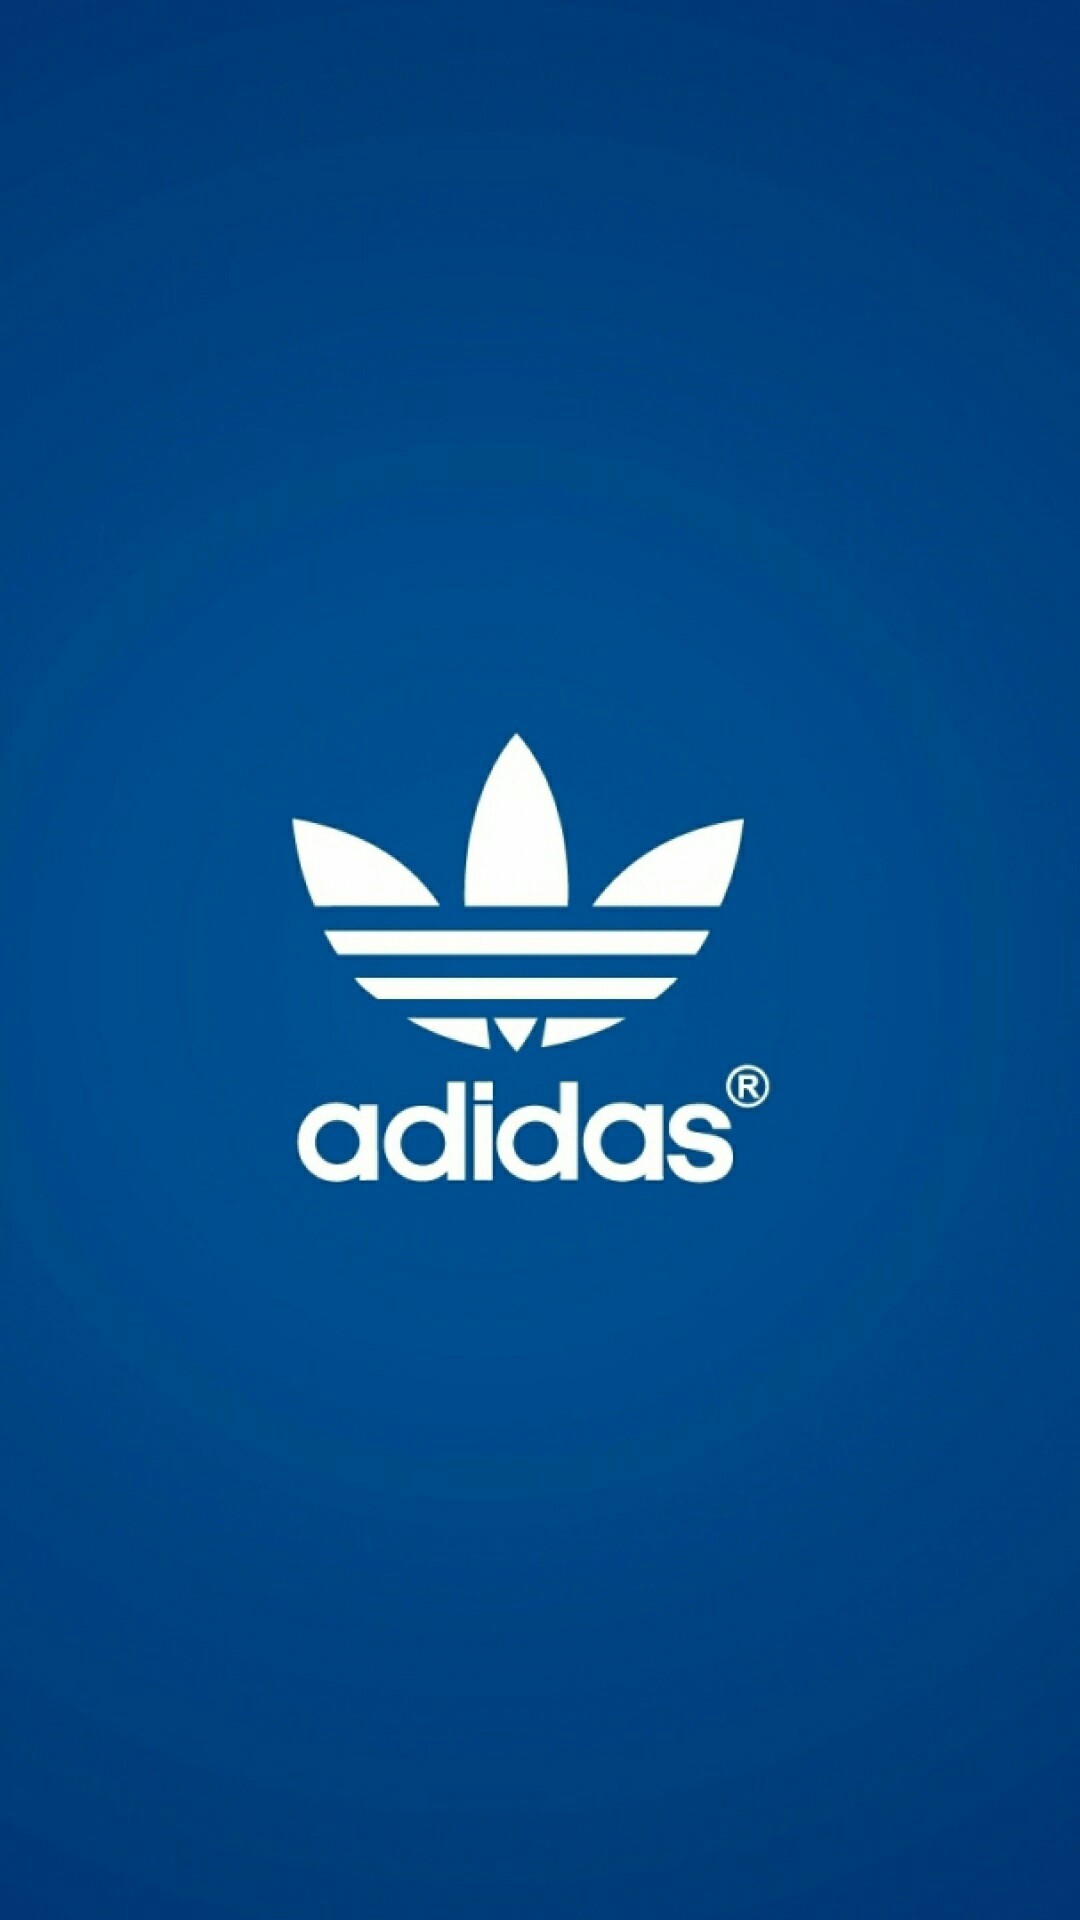 1080x1920 Explore Adidas Logo, Wallpaper For Iphone and more!